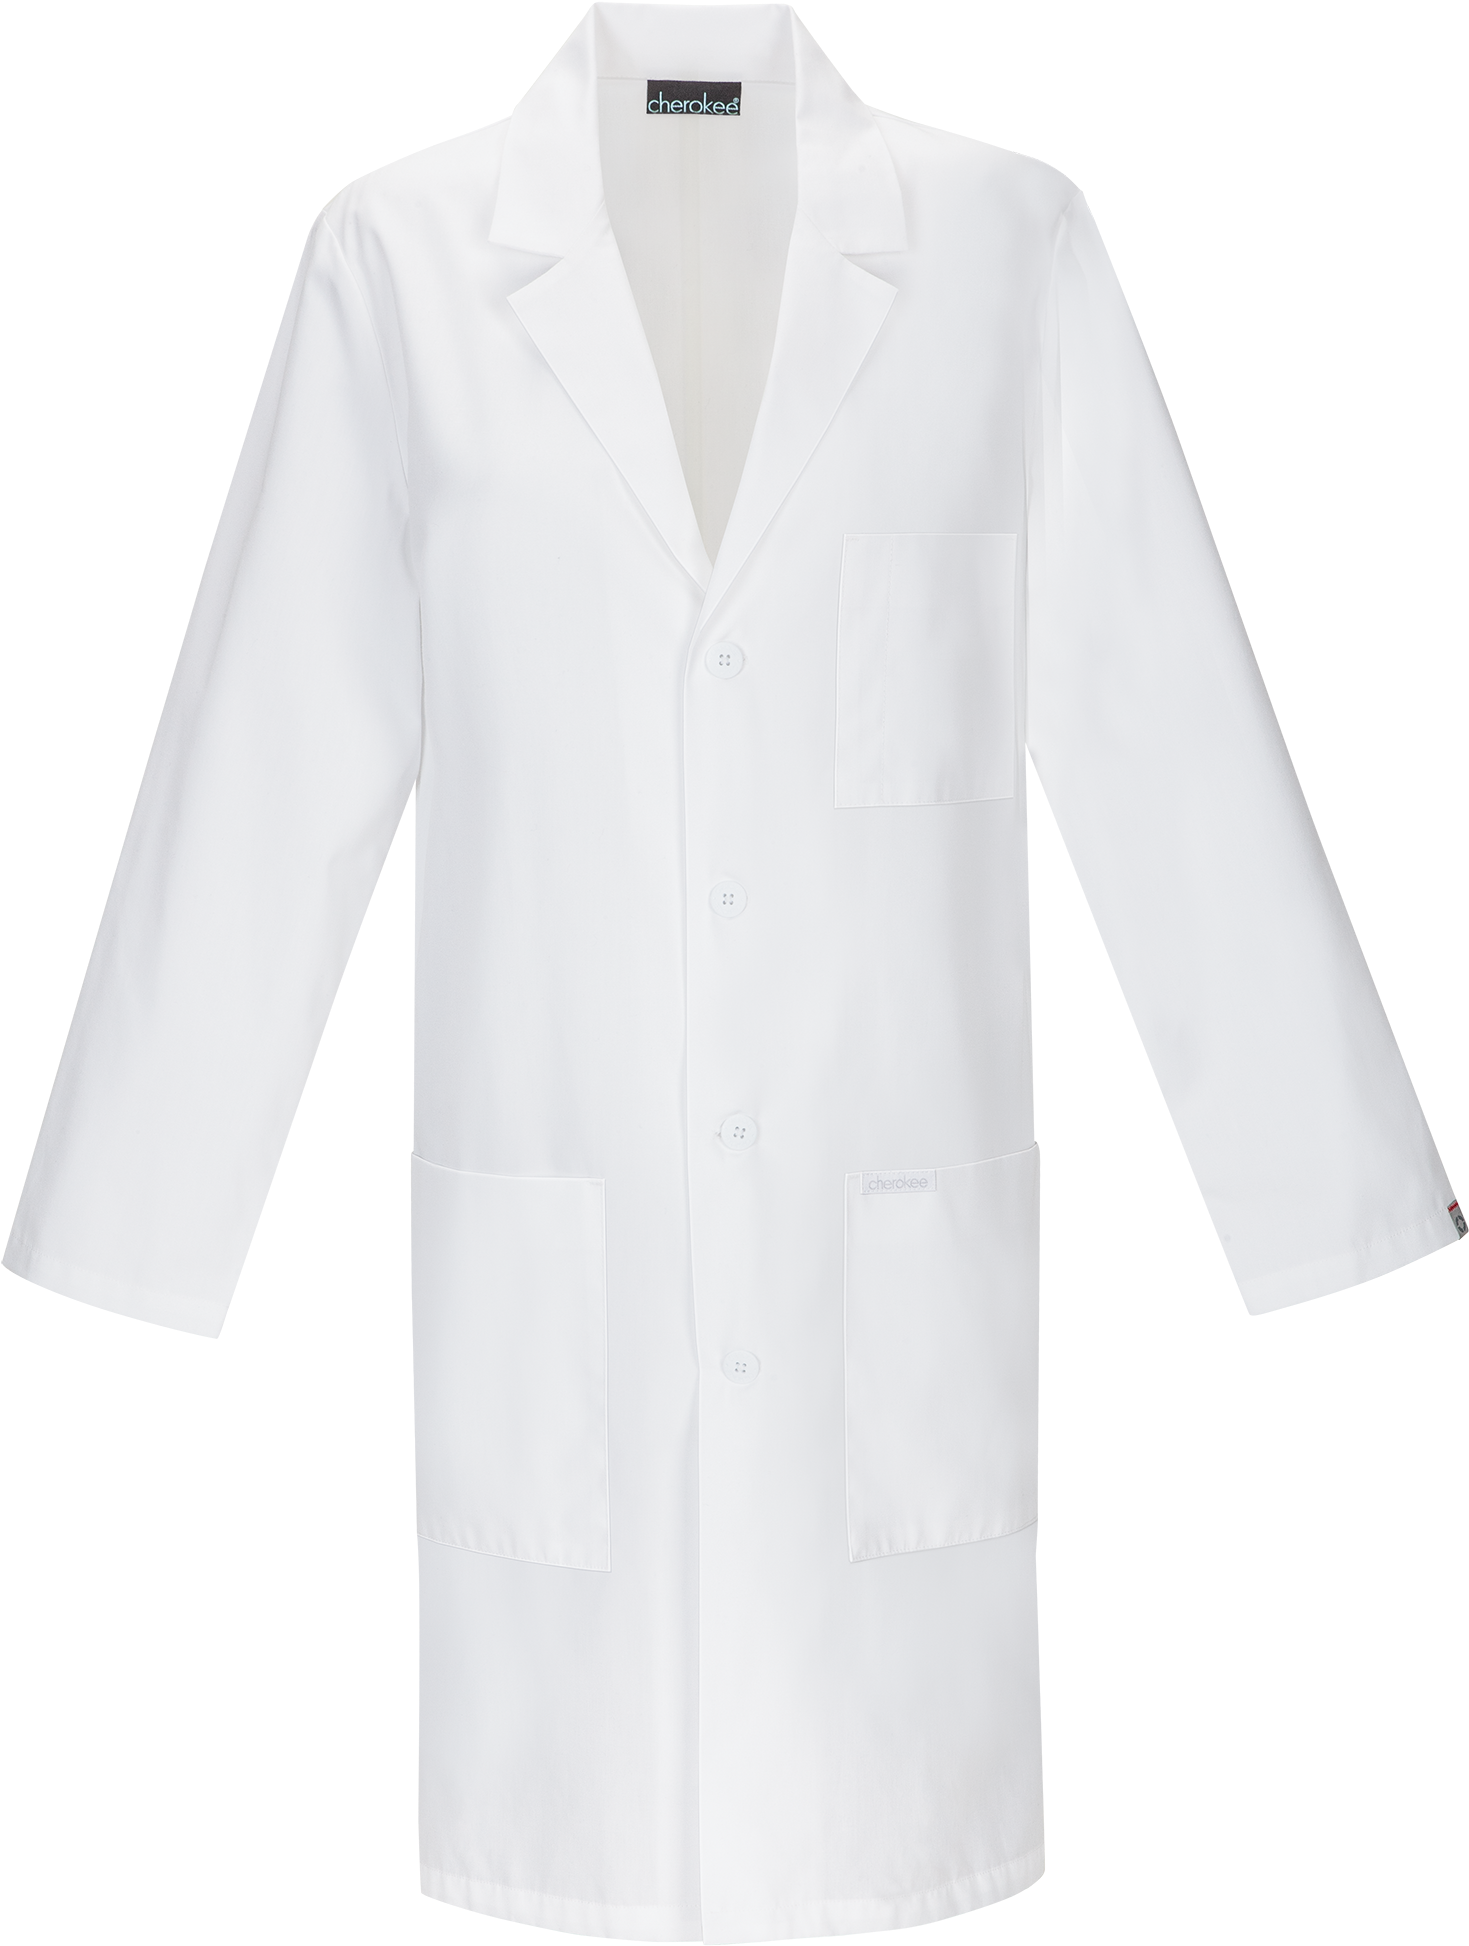 White Lab Coat Professional Apparel PNG